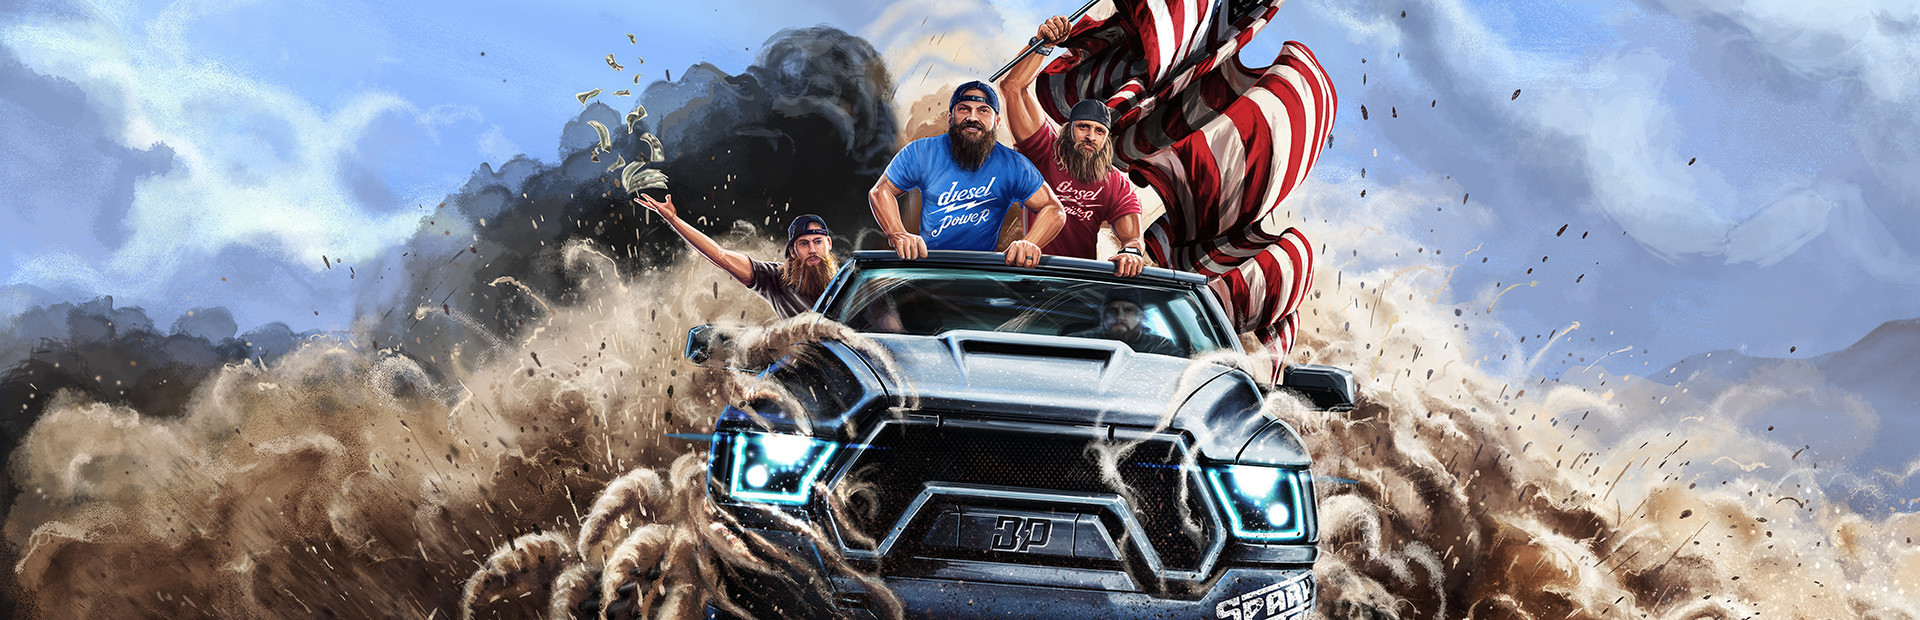 Diesel Brothers: Truck Building Simulator cover image